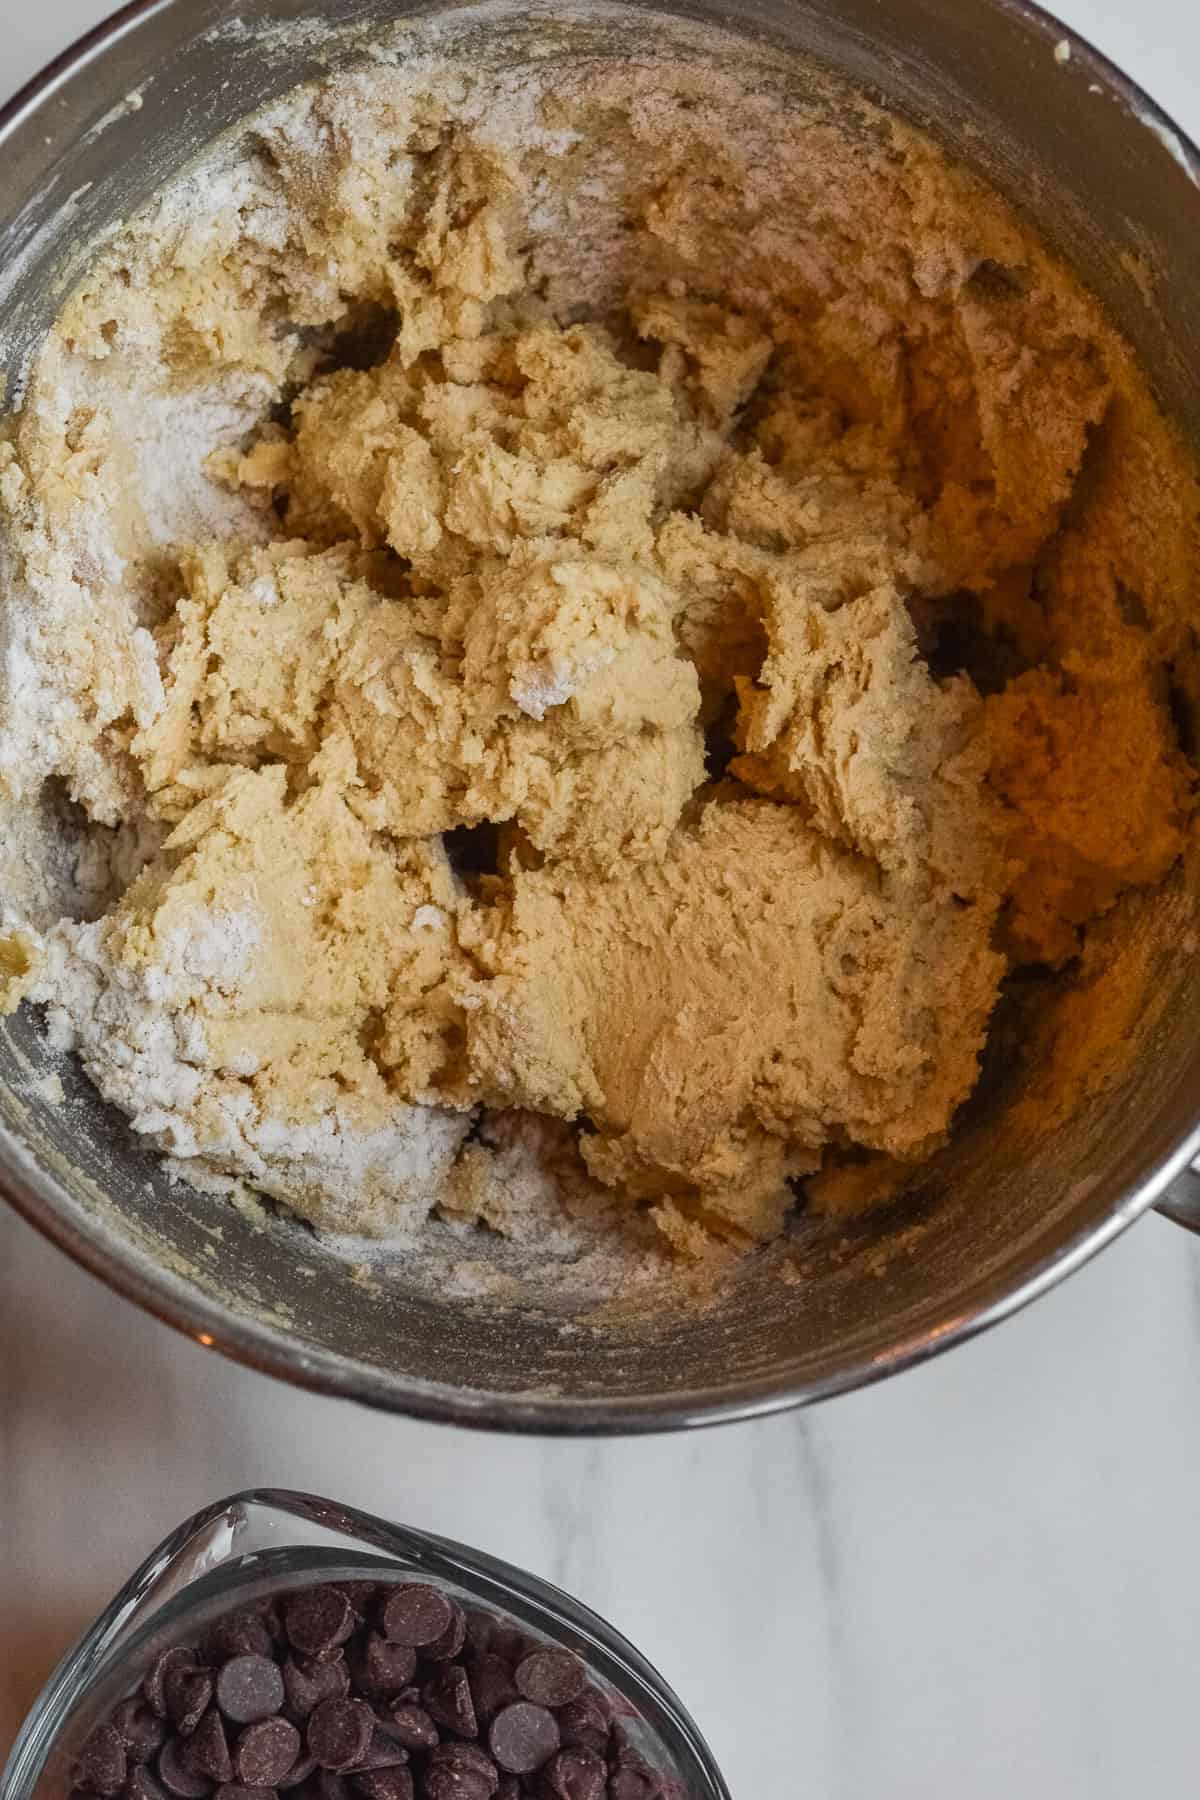 Perfectly mixed cookie dough.